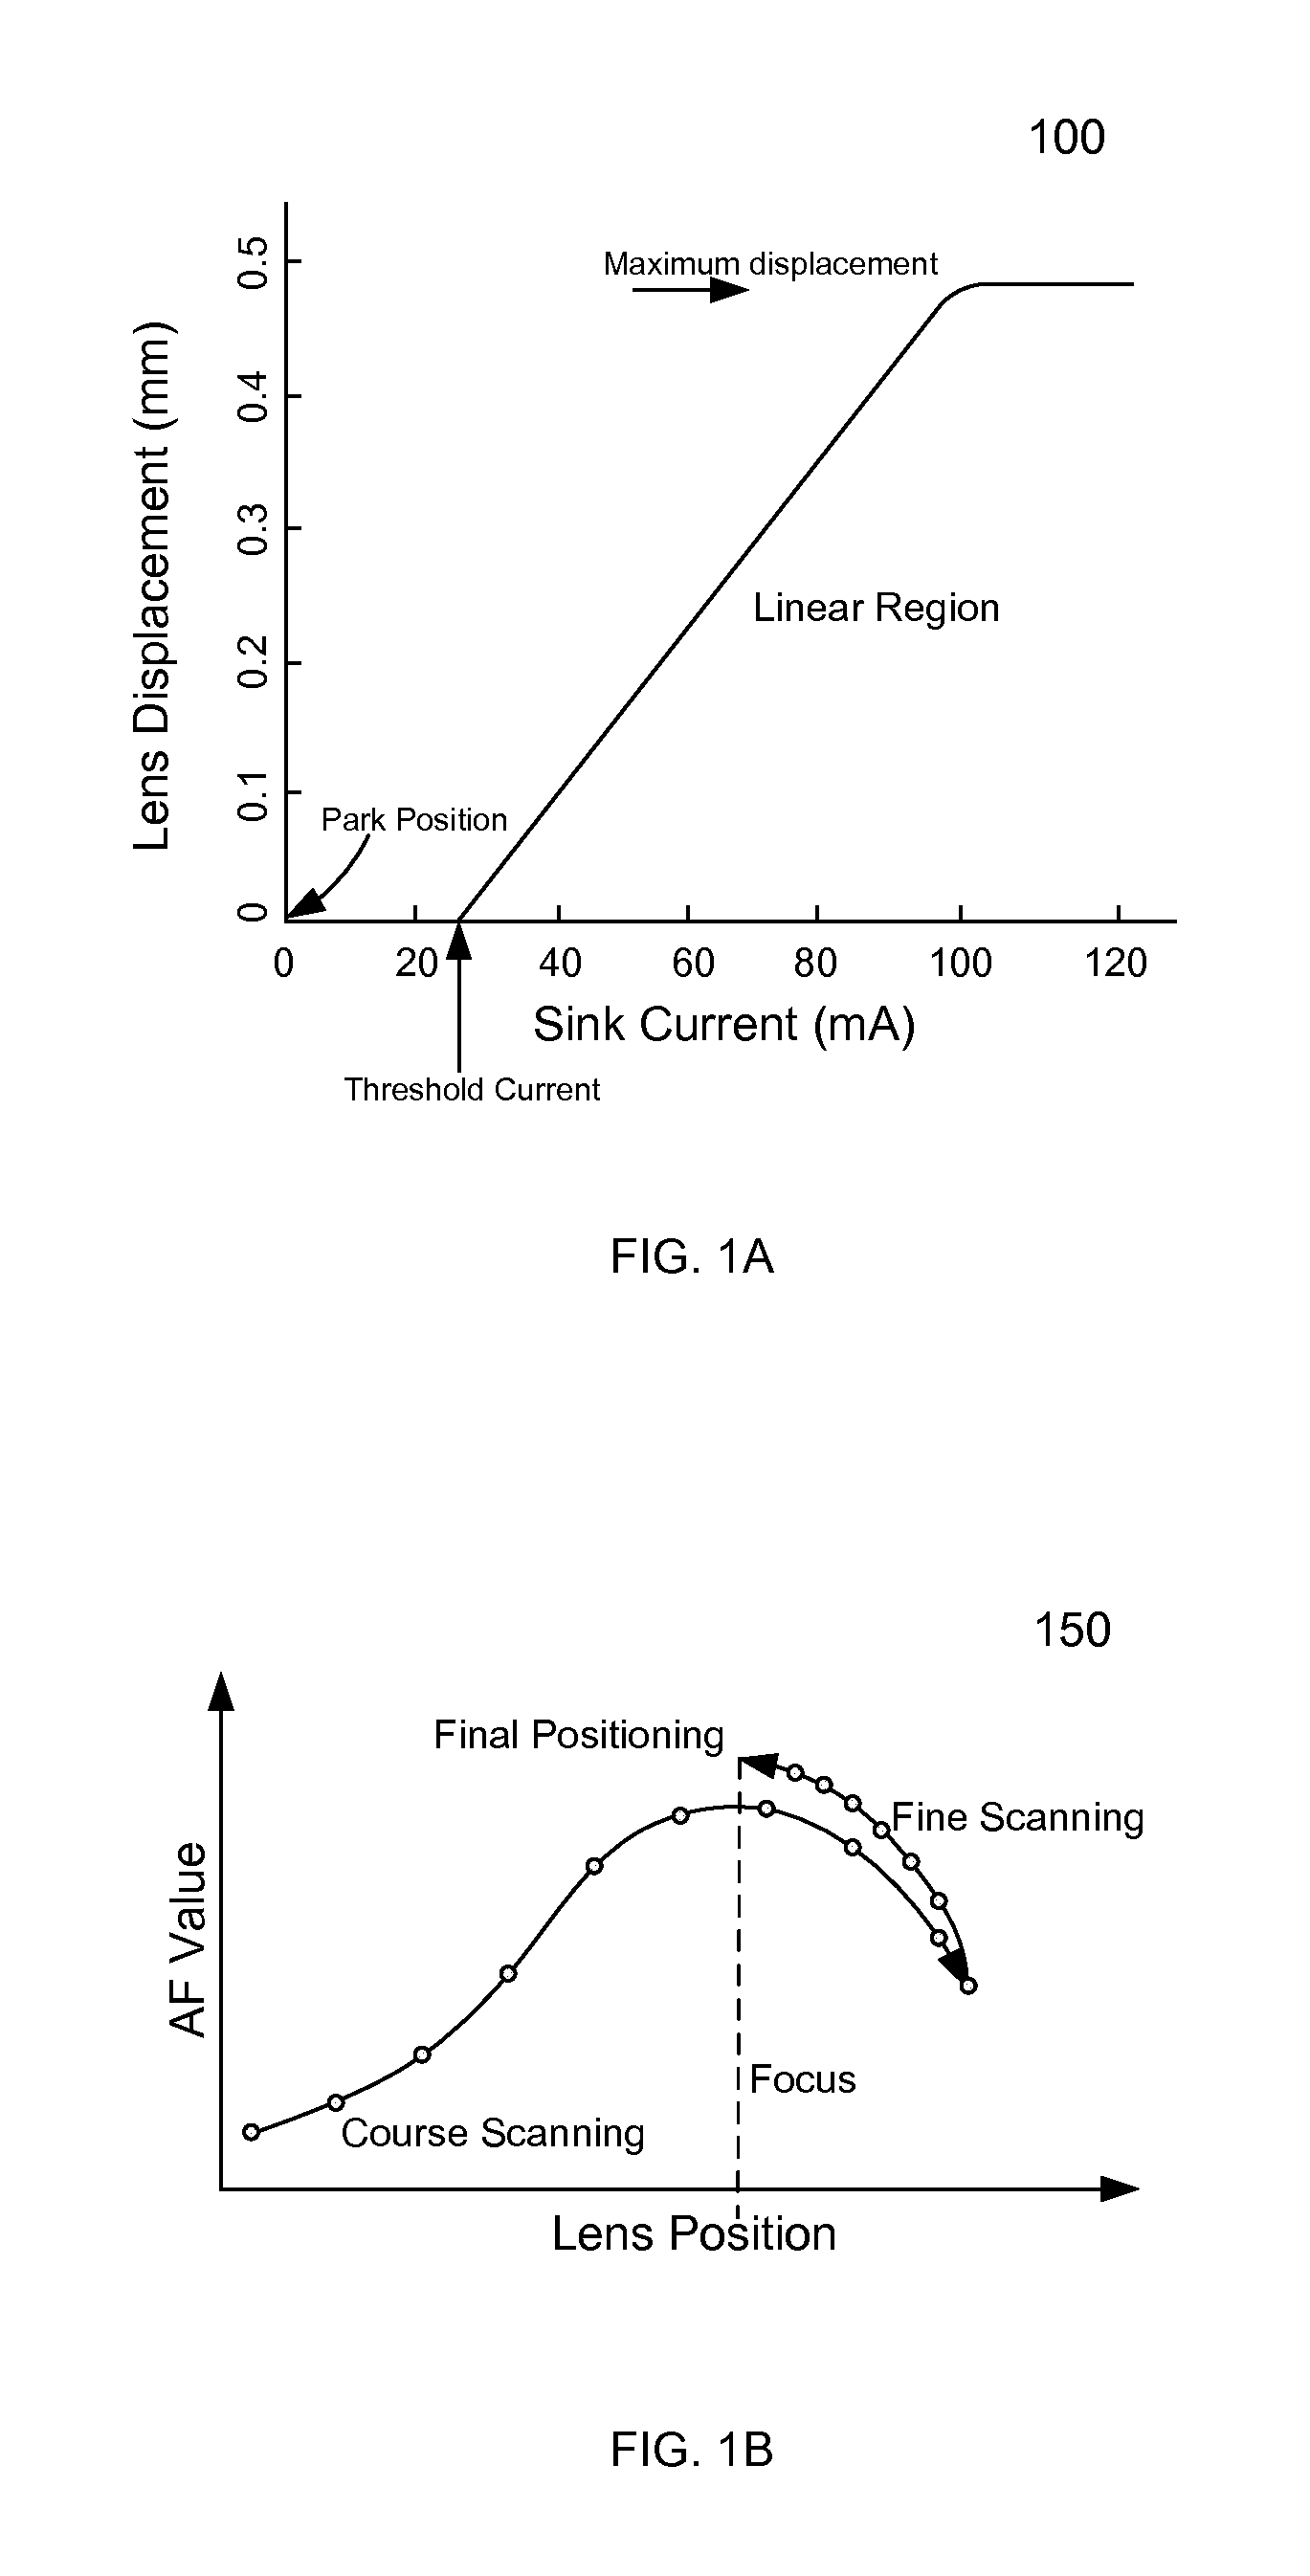 Self-calibrated ringing compensation for an autofocus actuator in a camera module